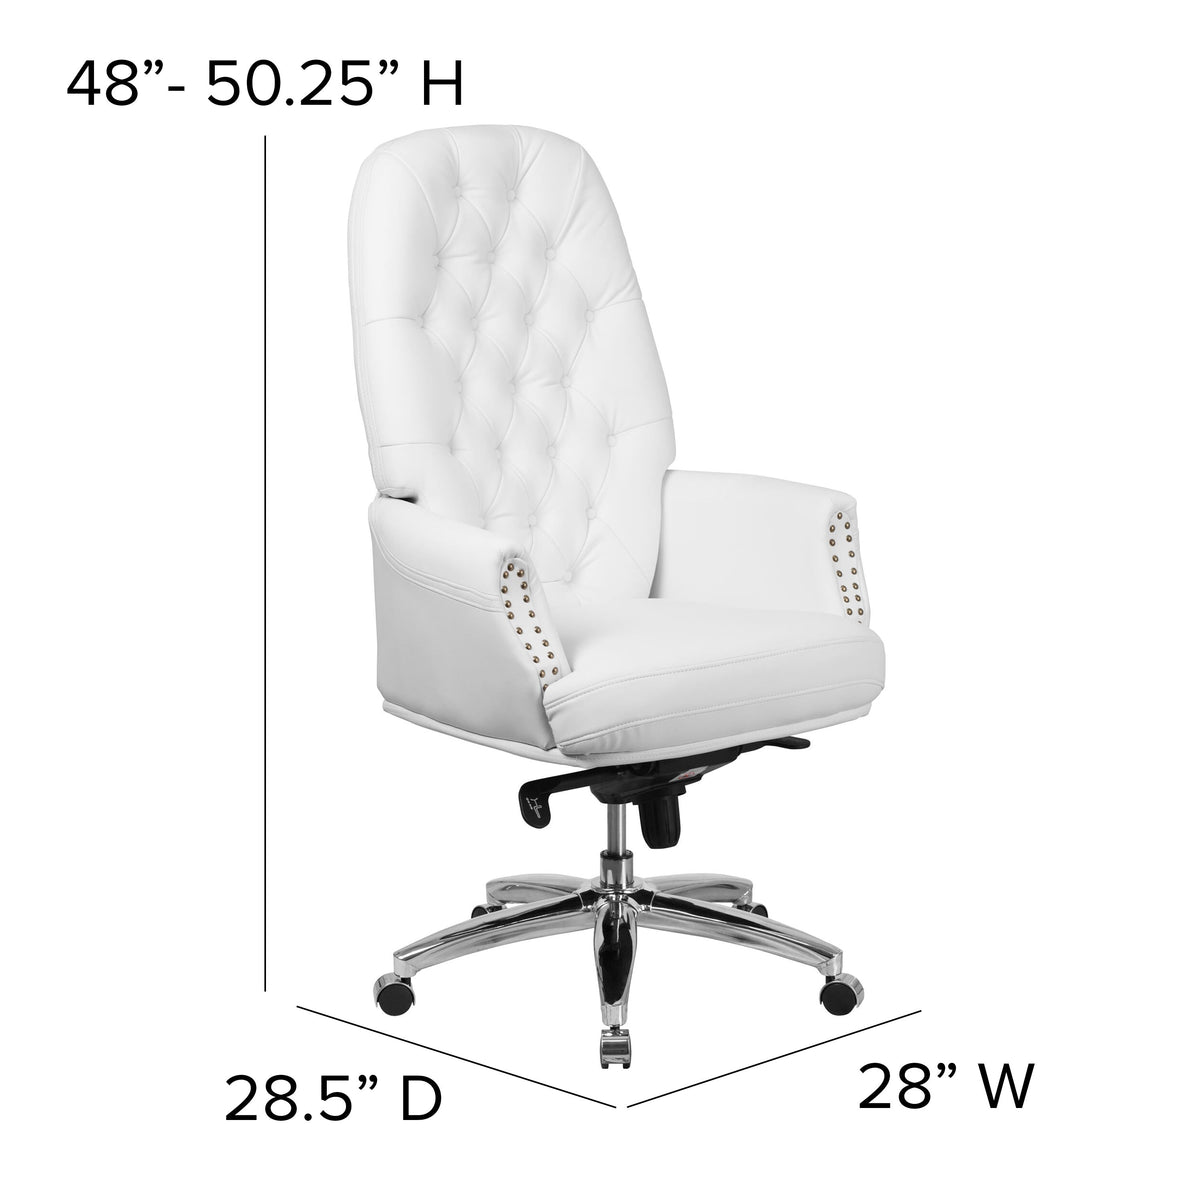 White |#| High Back Tufted White LeatherSoft Multifunction Ergonomic Office Chair w/Arms